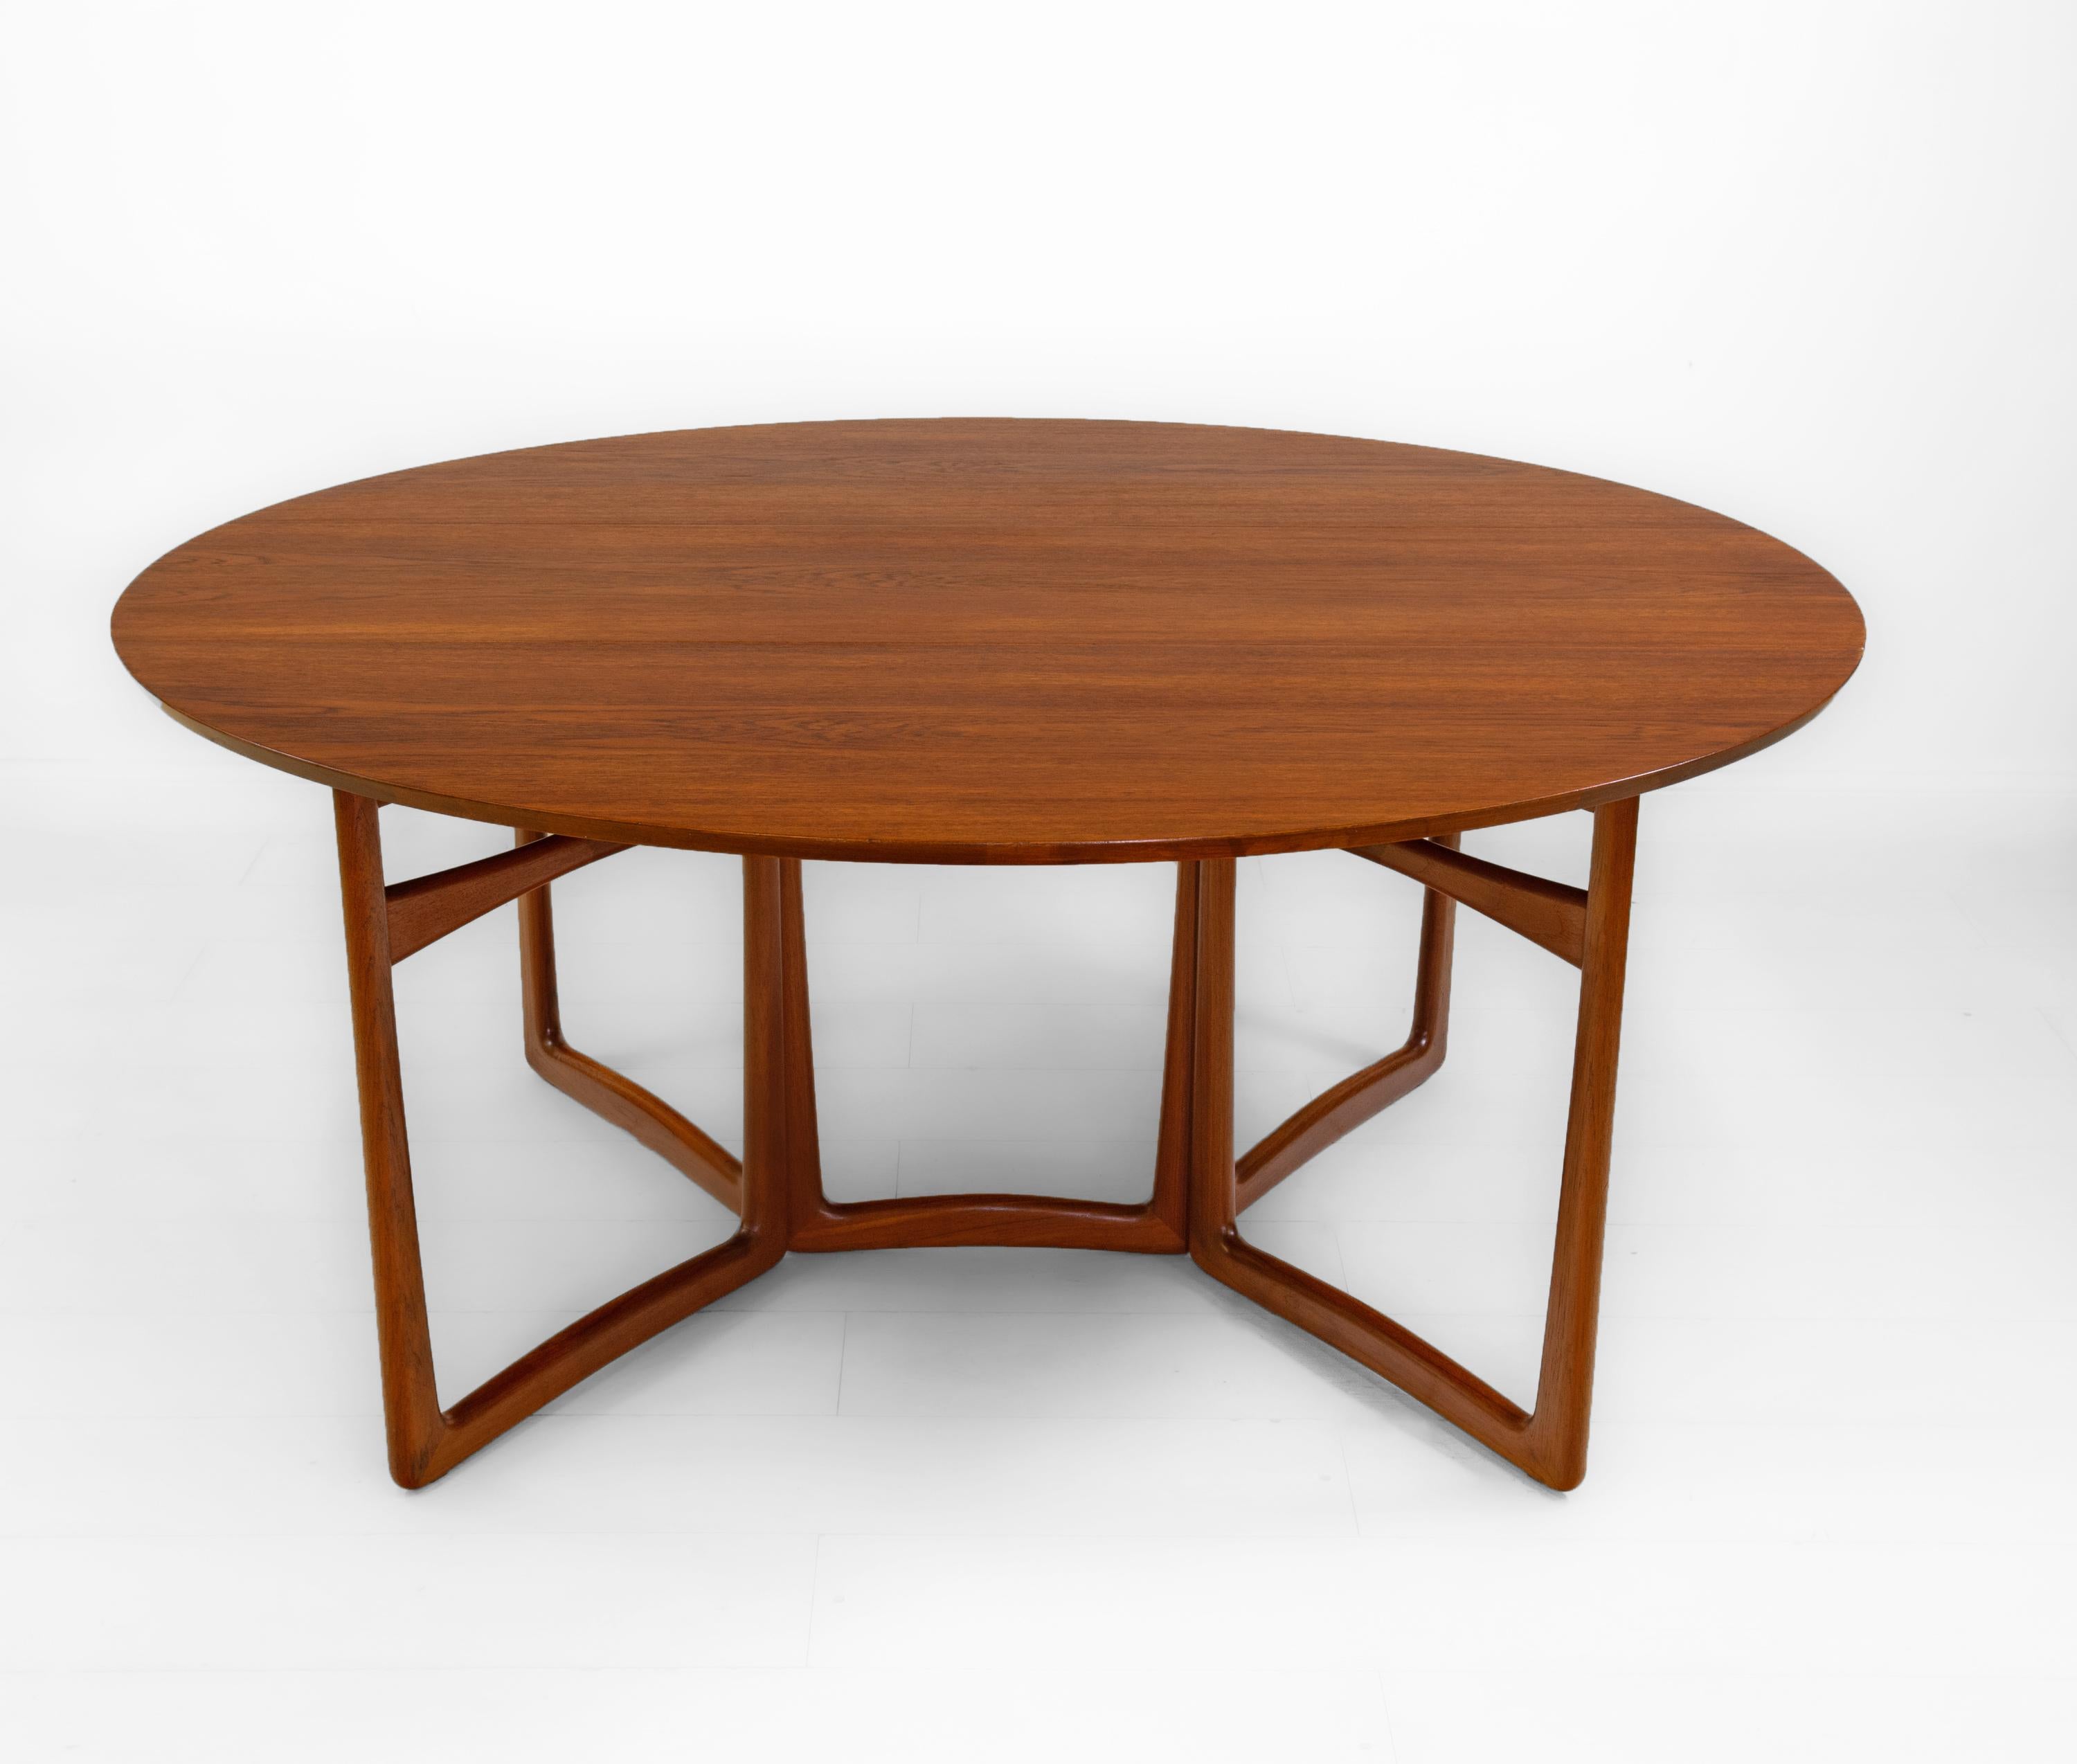 Stunning large teak drop leaf oval dining table, designed by Peter Hvidt & Orla Mølgaard. Made in Denmark for France & Søn. Maker's label. Circa 1950-60s.

The table shows sculptural legs which open to an oval shape on piano and brass ball hinges.